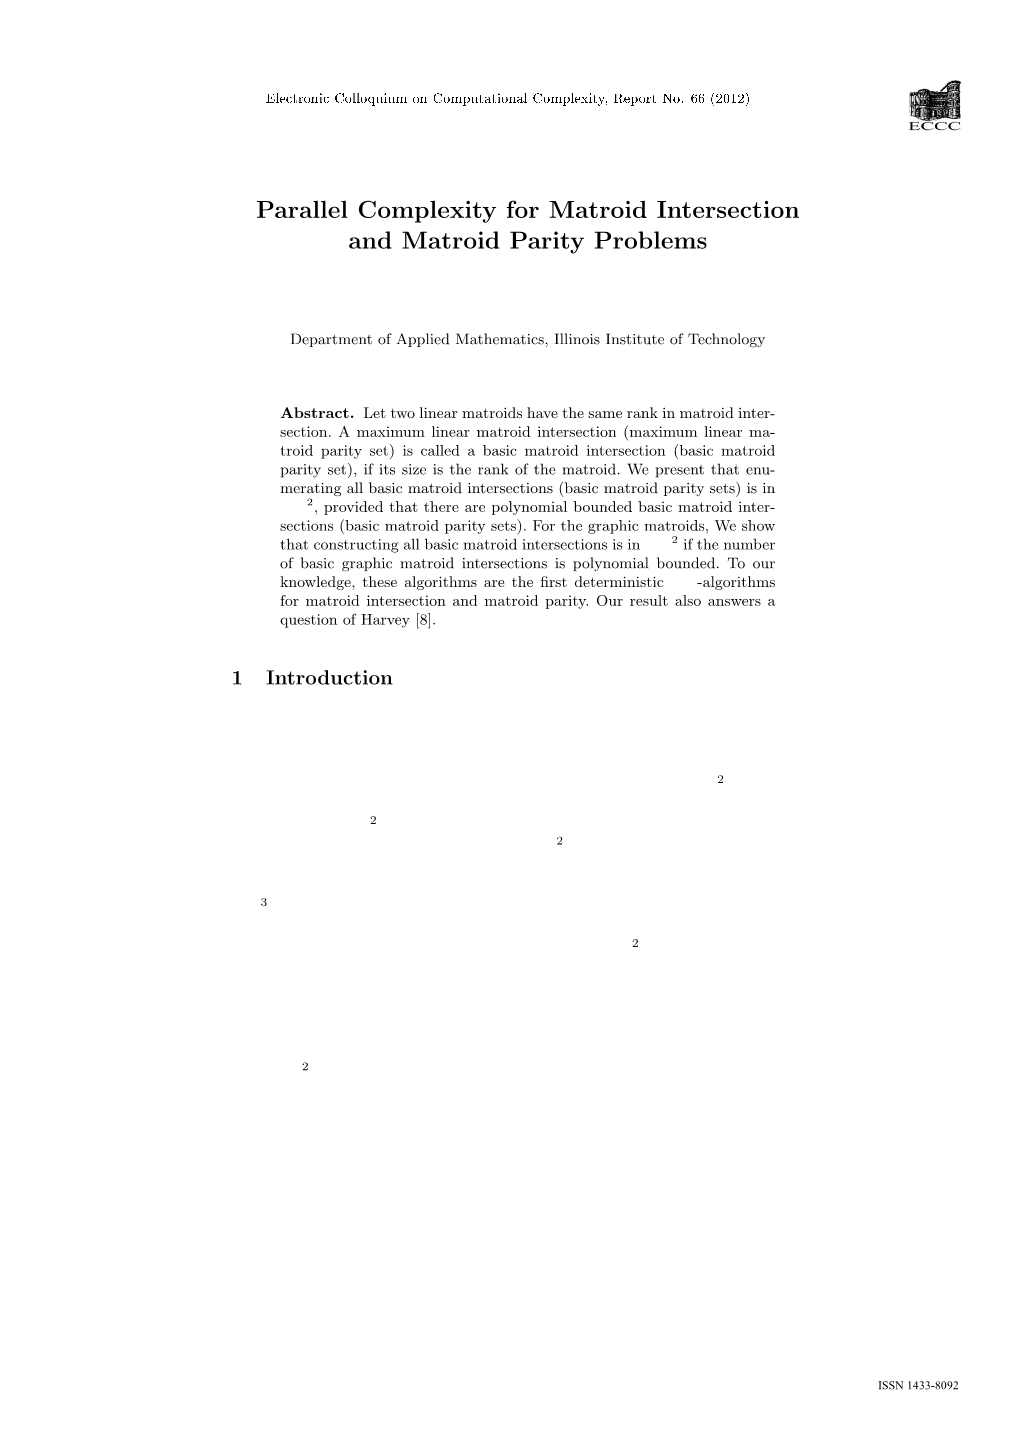 Parallel Complexity for Matroid Intersection and Matroid Parity Problems